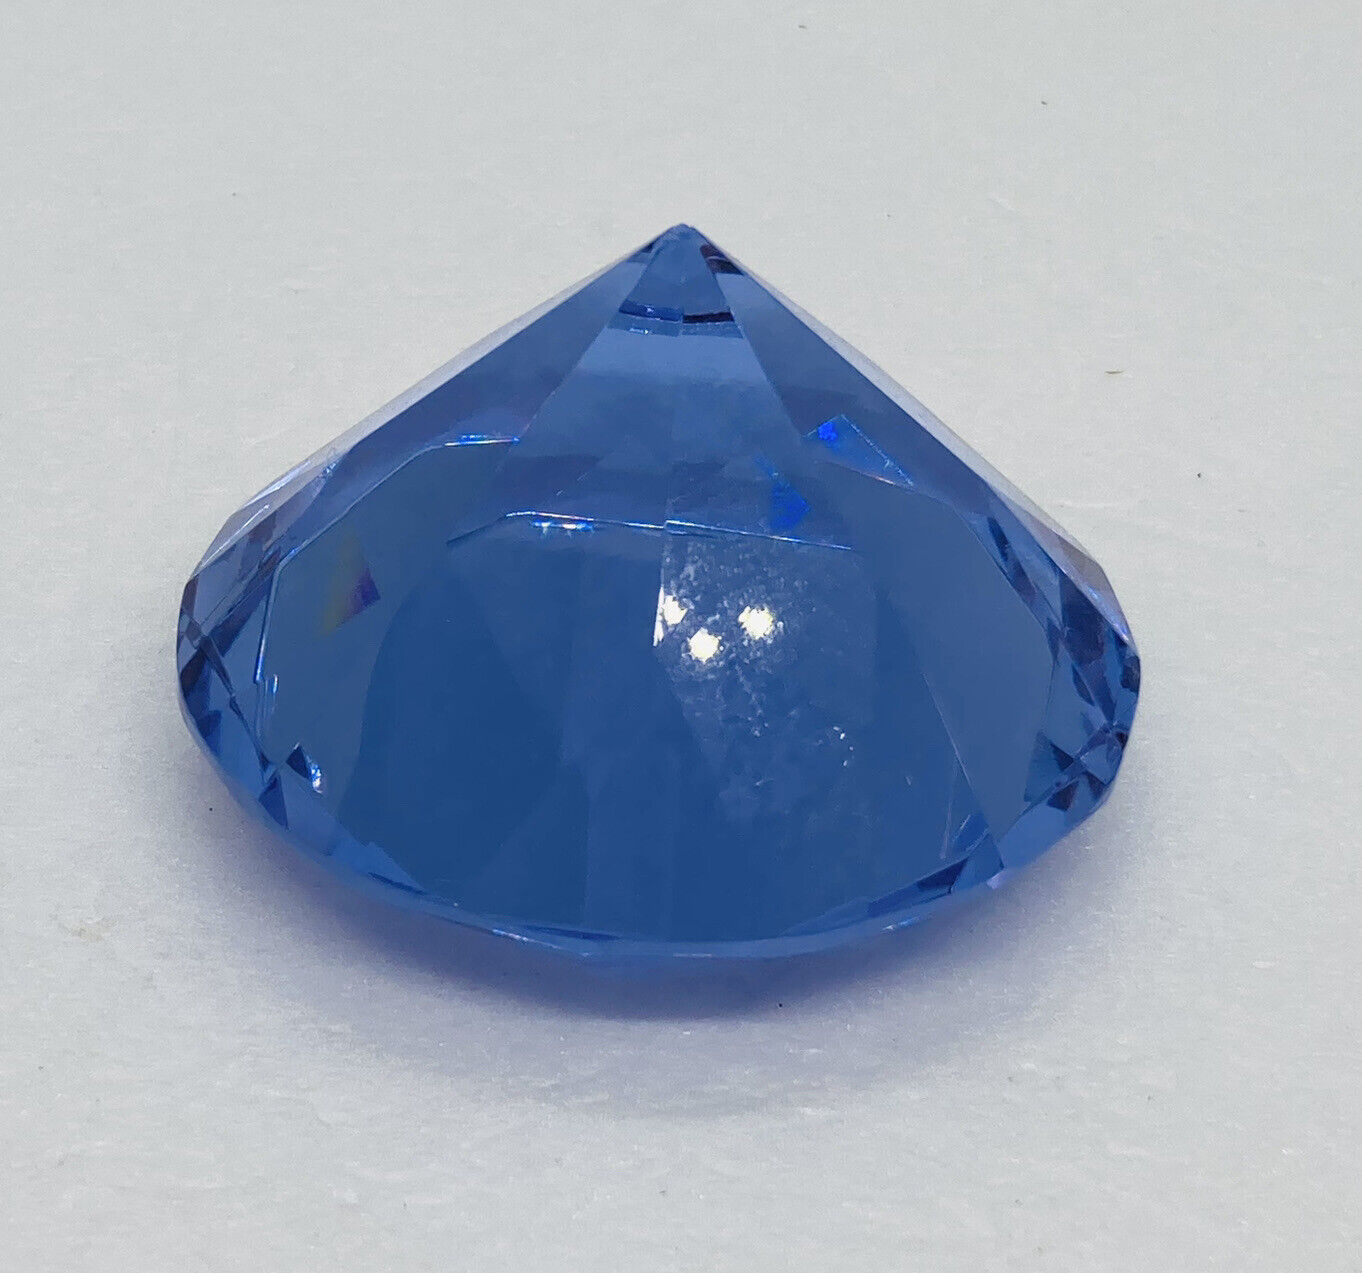 Vintage Blue Diamond Shaped Paperweight Cut Crystal Glass Tabletop Art Decor 22